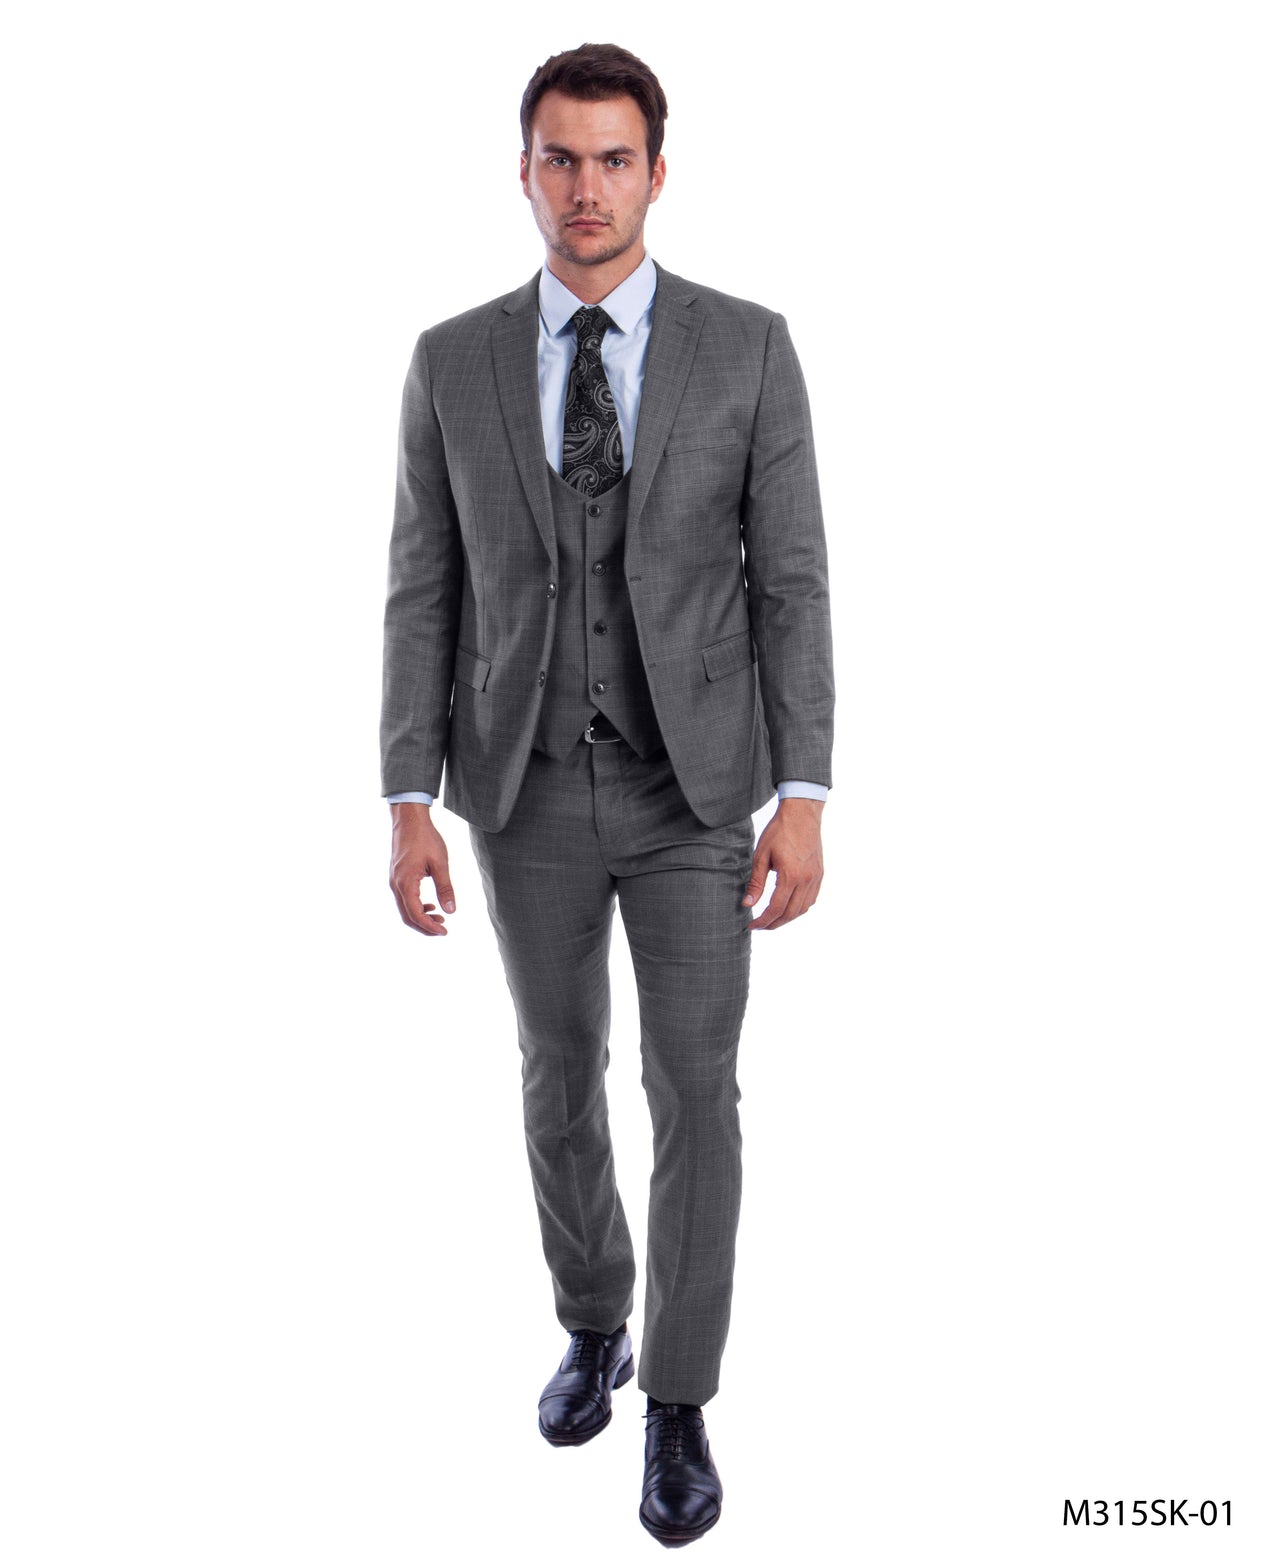 Gray Suit For Men Formal Suits For All Ocassions - Hattitude